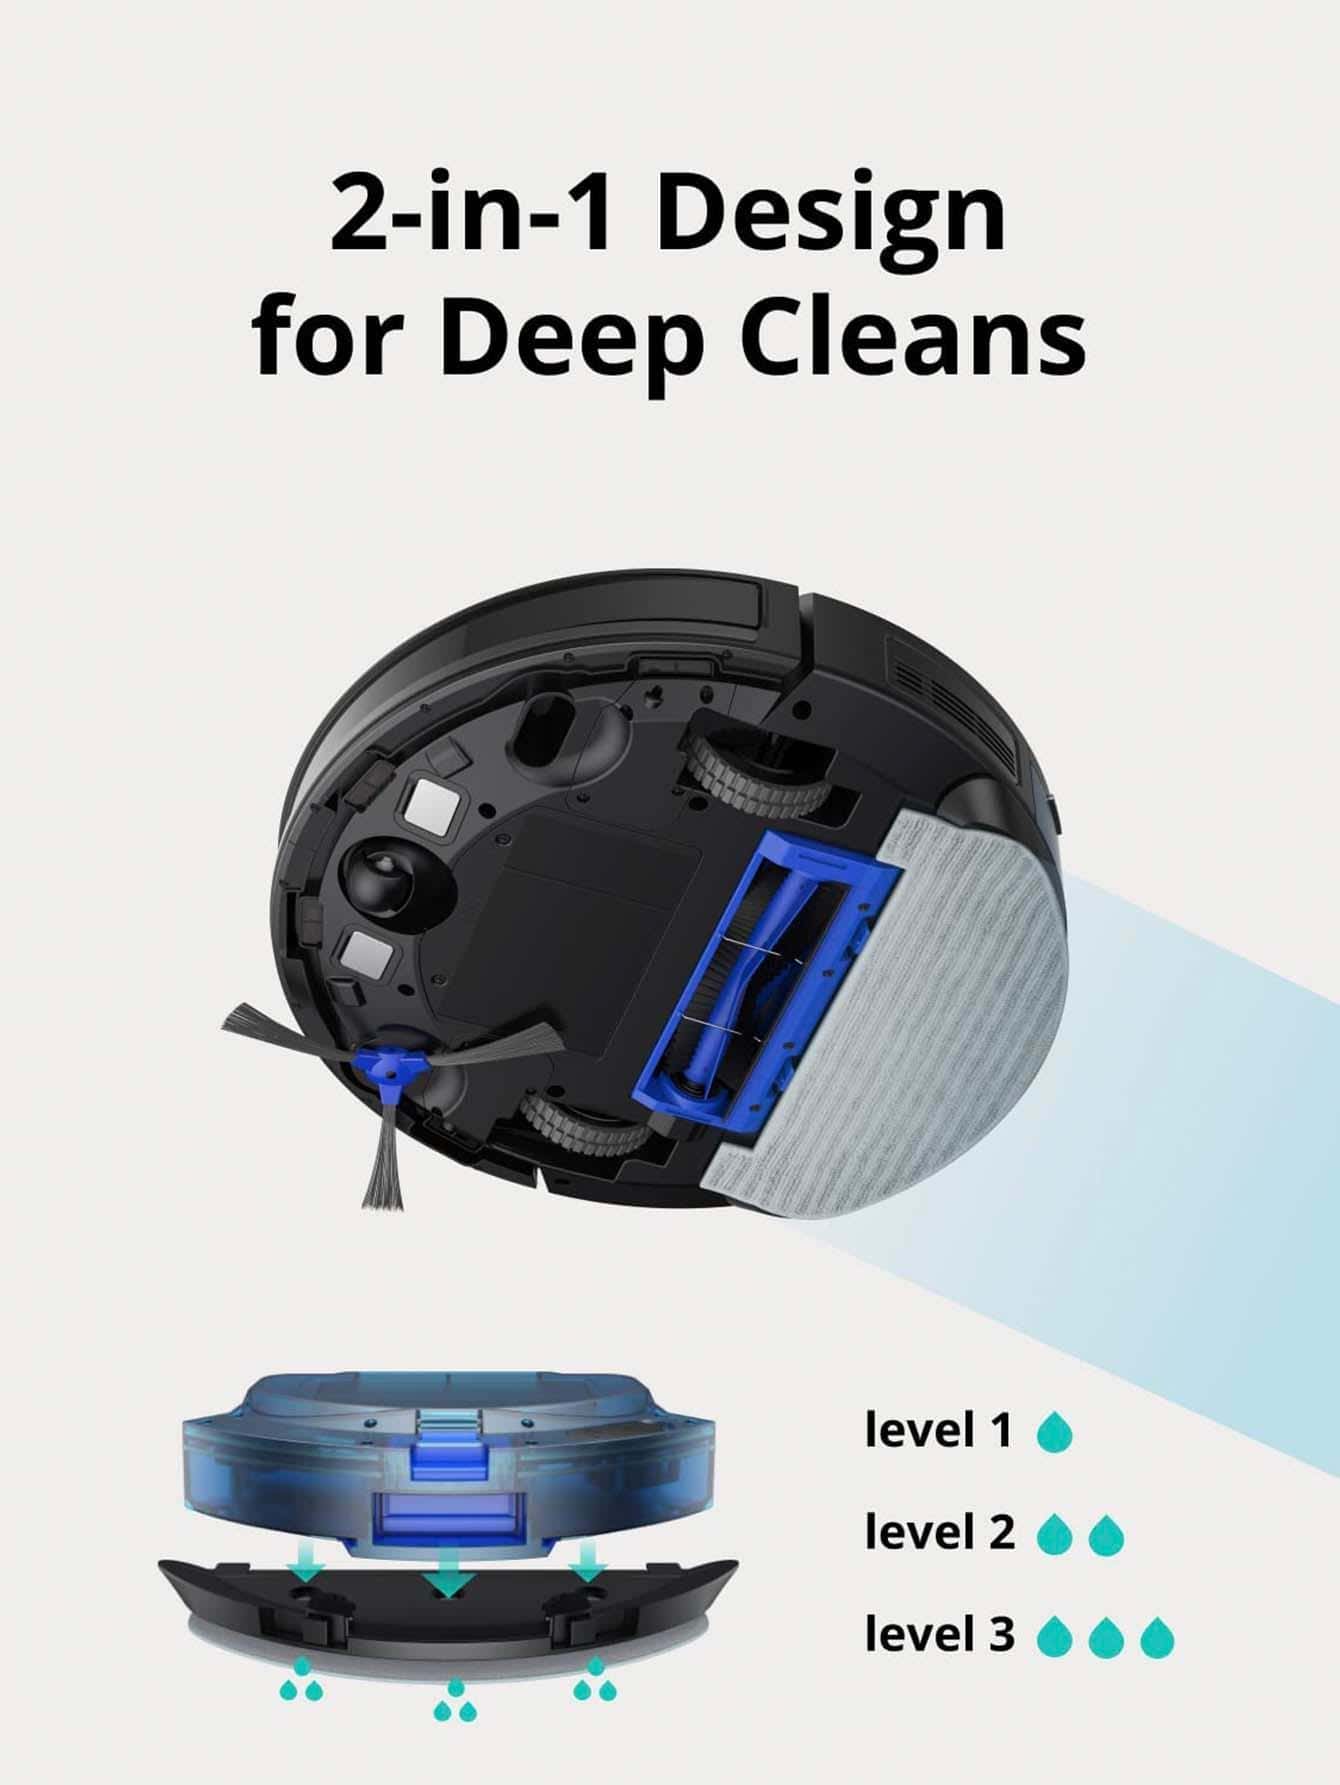 eufy Clean by Anker, Clean G40 Hybrid, Robot Vacuum, Robot Vacuum and Mop, 2,500 Pa Suction Power, Wi-Fi Connected, Planned Pathfinding